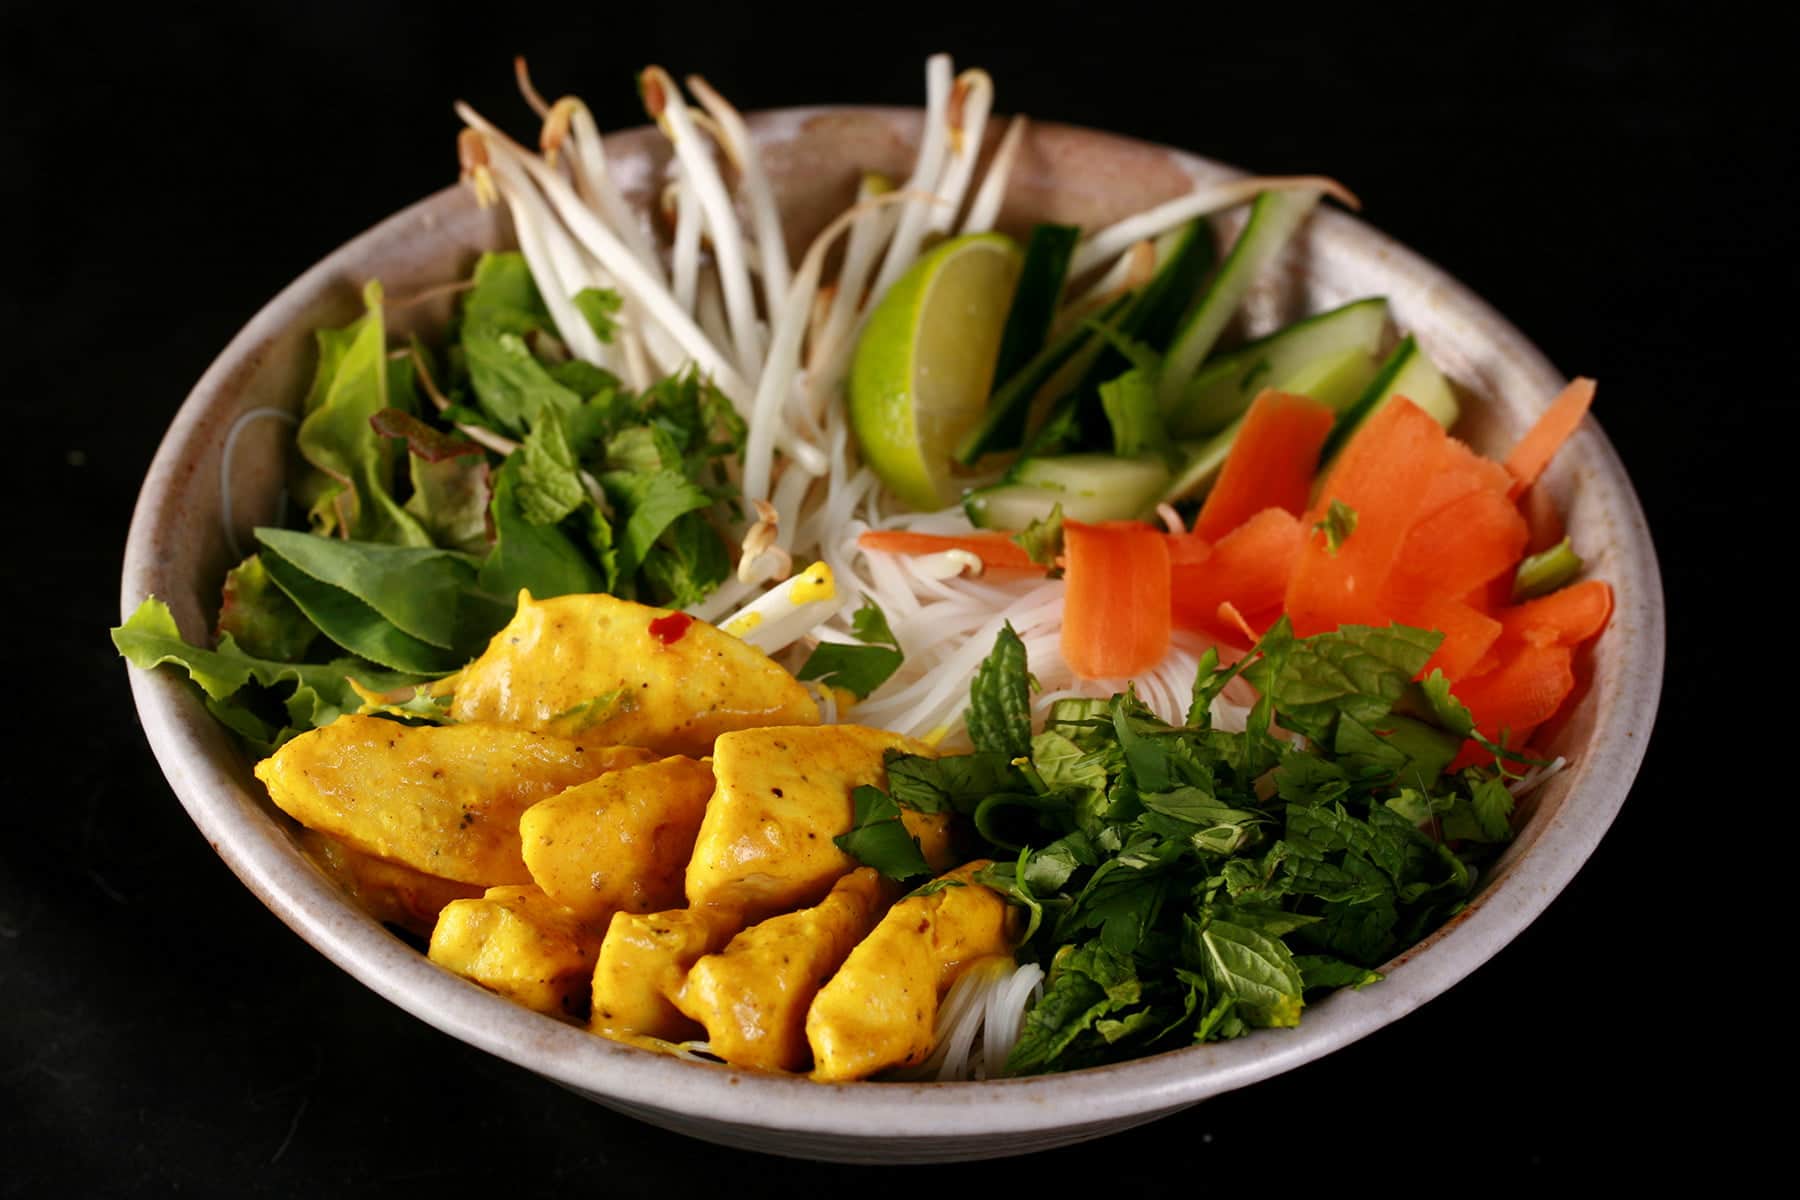 A close up view of a bowl of curried chicken Vietnamese noodle salad. Thin vermicelli noodles are visible under an arrangement of curred chicken pieces, cilantro and mint, carrot ribbons, bean sprouts, and lime wedges.